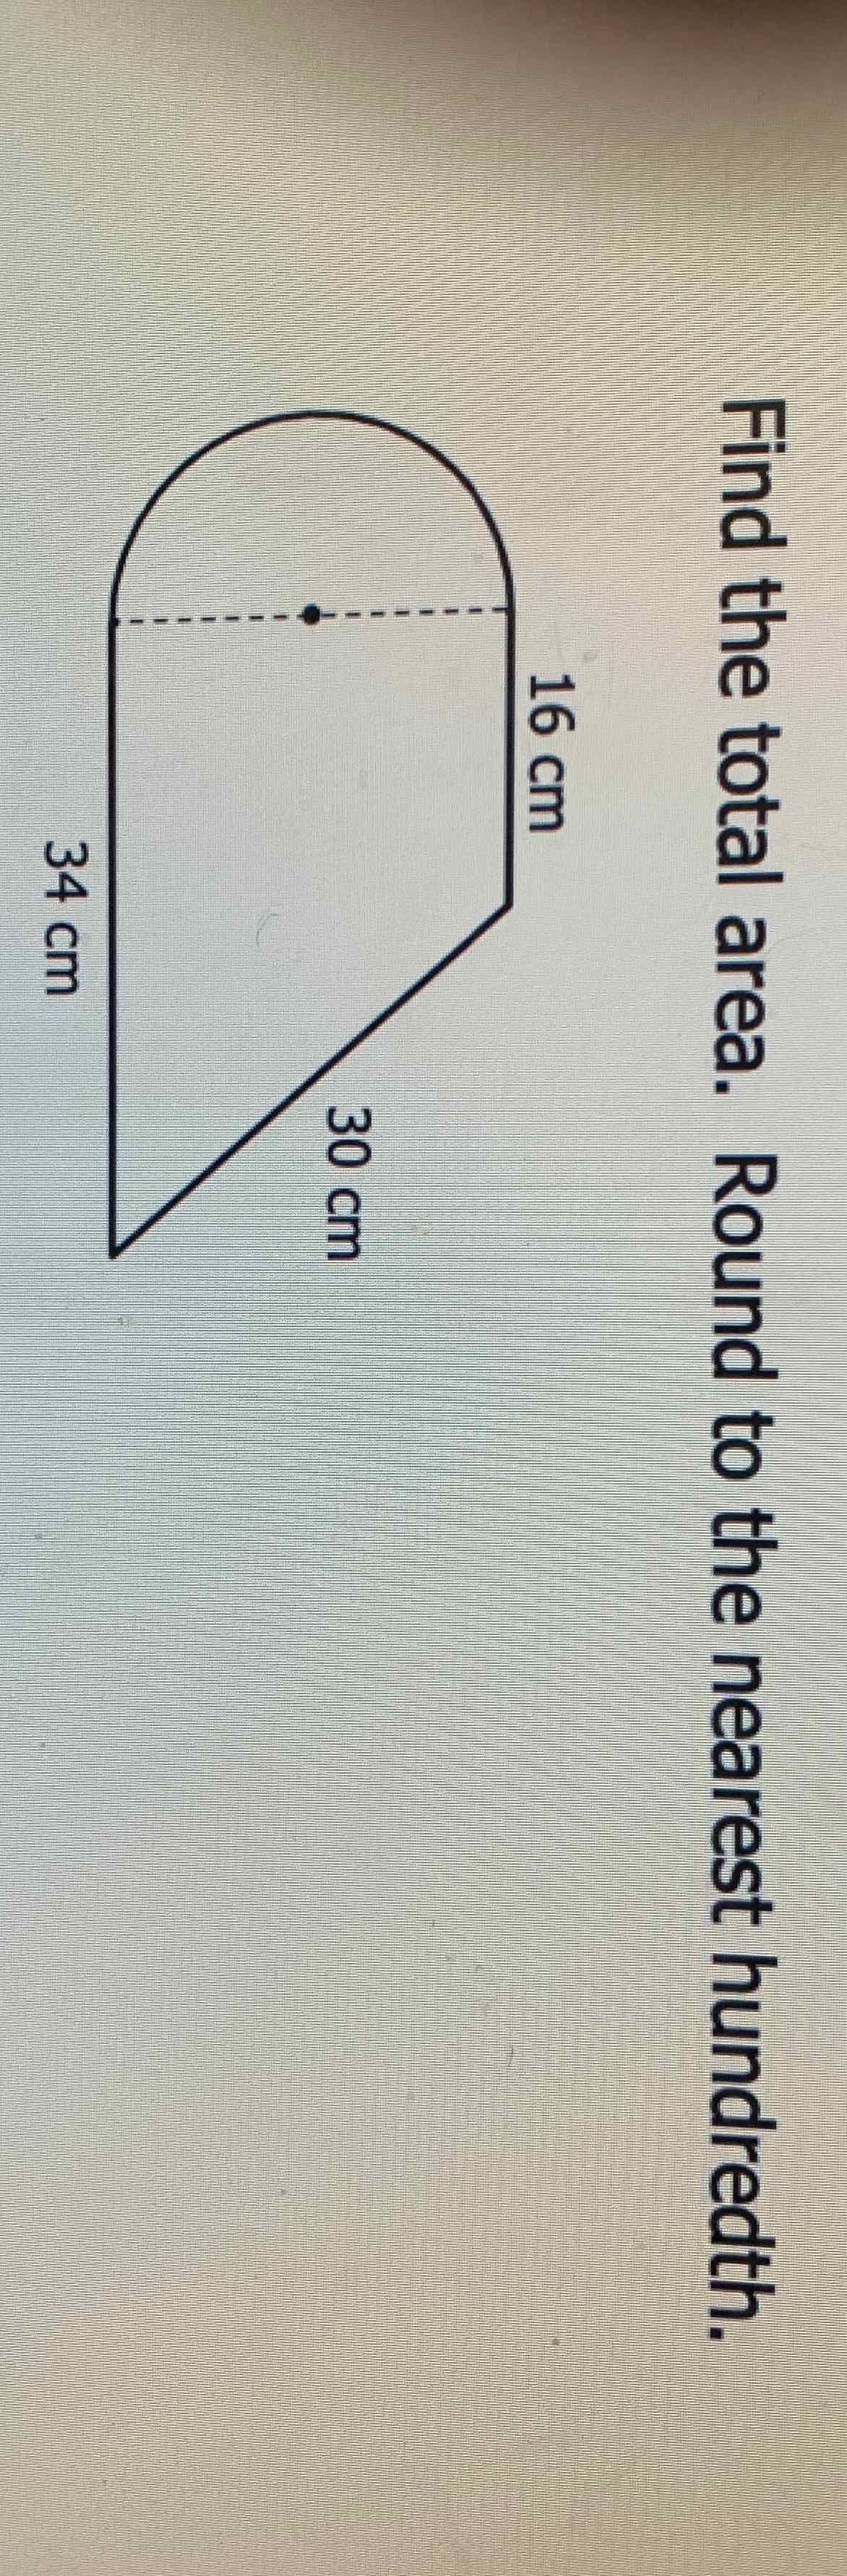 Find the total area. Round to the nearest hundredth.